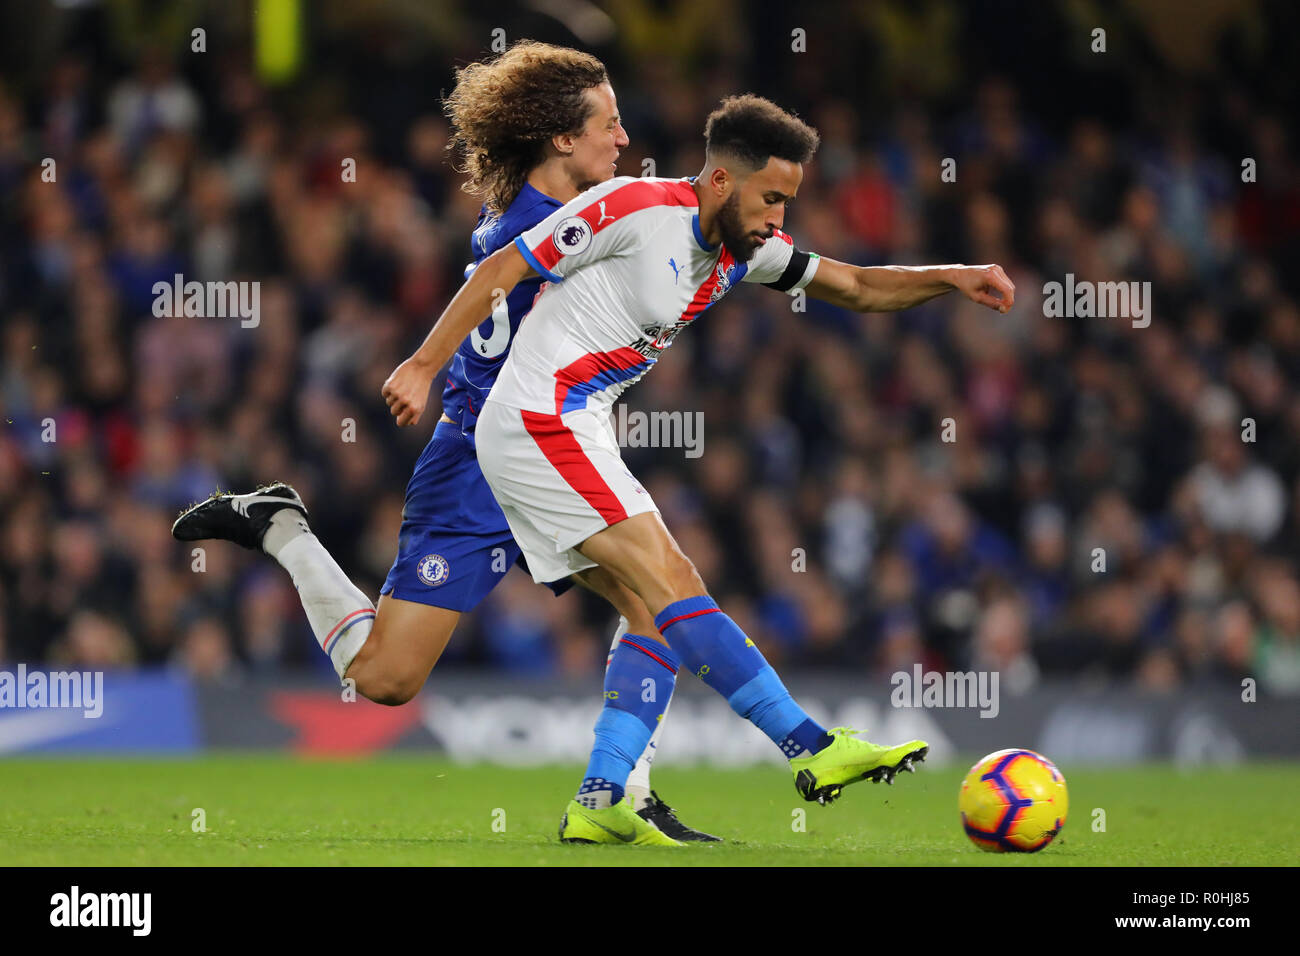 Andros Townsend of Crystal Palace scores the equalising goal, making it 1-1 - Chelsea v Crystal Palace, Premier League, Stamford Bridge, London - 4th November 2018  STRICTLY EDITORIAL USE ONLY - DataCo rules apply - The use of this image in a commercial context is strictly prohibited unless express permission has been given by the club(s) concerned. Examples of commercial usage include, but are not limited to, use in betting and gaming, marketing and advertising products. No use with unauthorised audio, video, data, fixture lists, club and or league logos or services including those listed as  Stock Photo